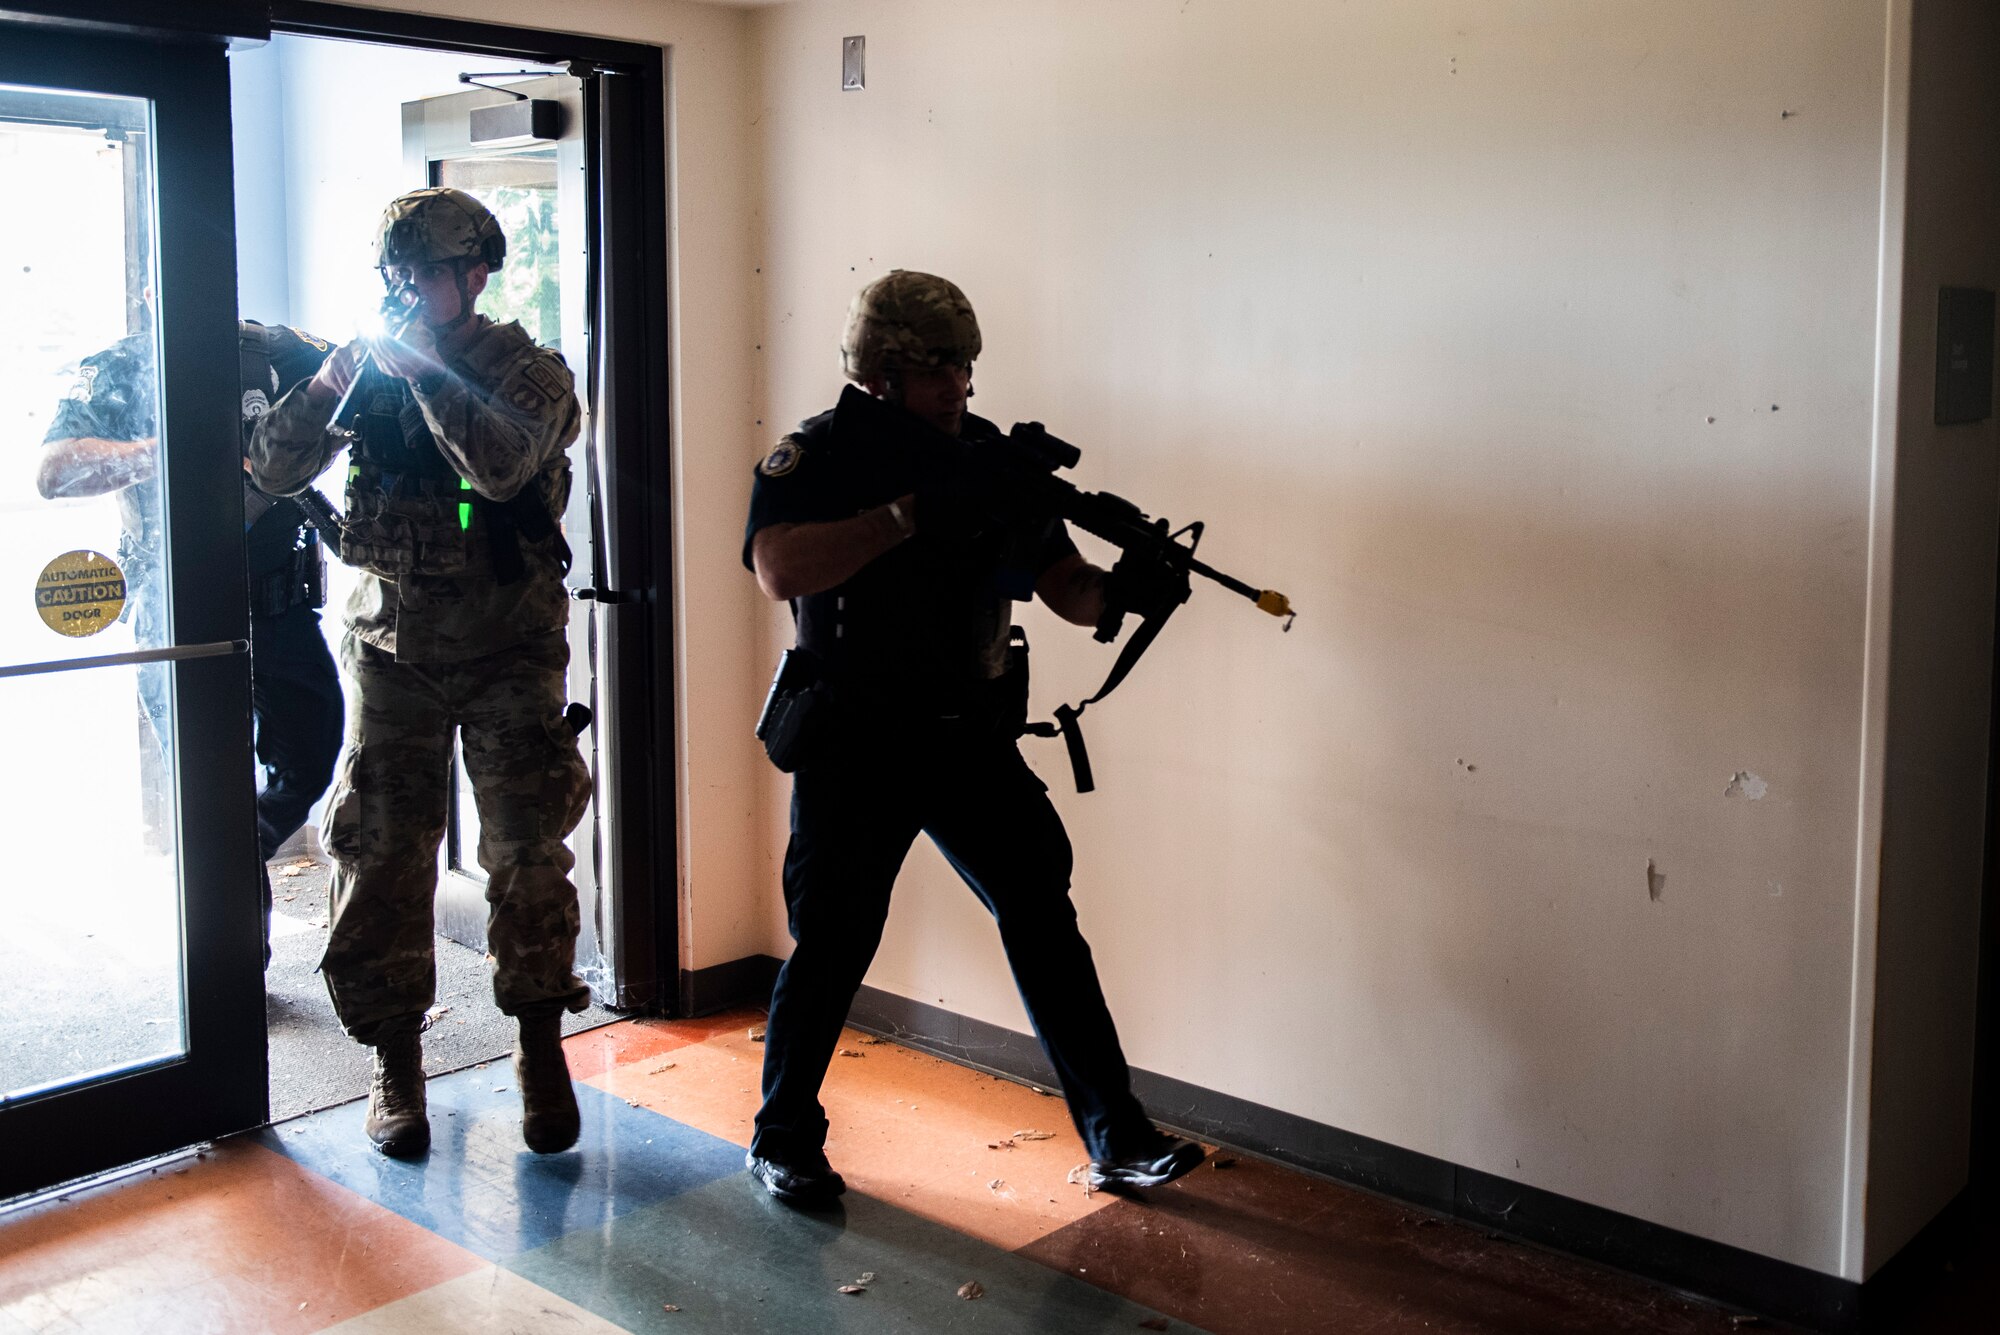 Members of the 88th Security Forces Squadron make entry to a building during an active shooter exercise, Aug. 18 at Wright-Patterson Air Force Base. Readiness exercises are routinely held to streamline unit cohesion when responding to emergencies. (U.S. Air Force photo by Wesley Farnsworth)